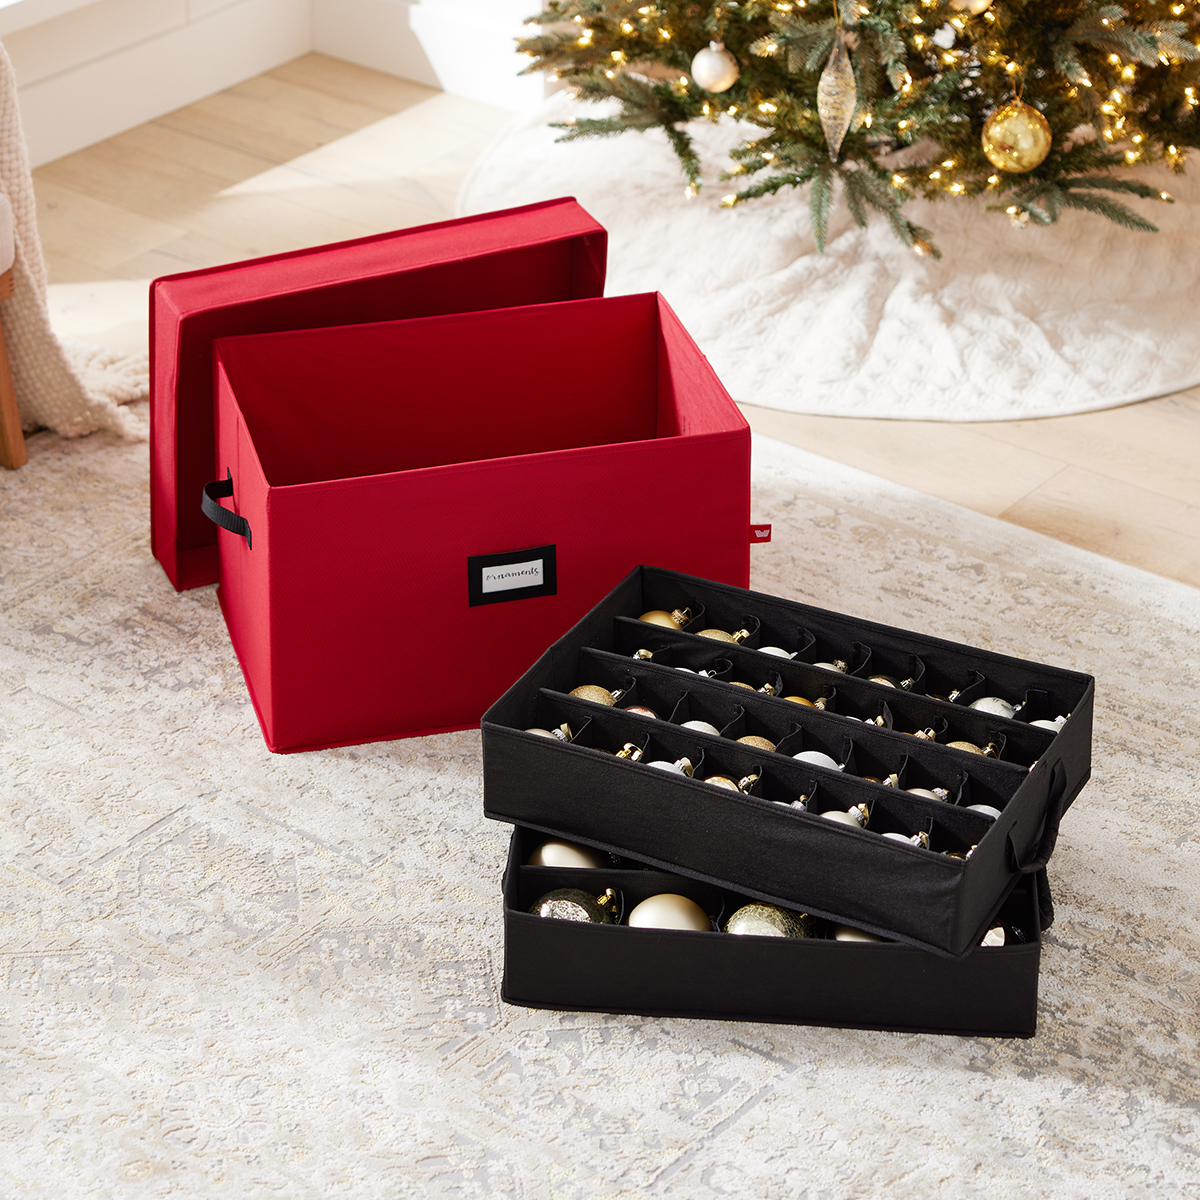 https://www.containerstore.com/catalogimages/498048/10095250-84-ornament-storage-box-red.jpg